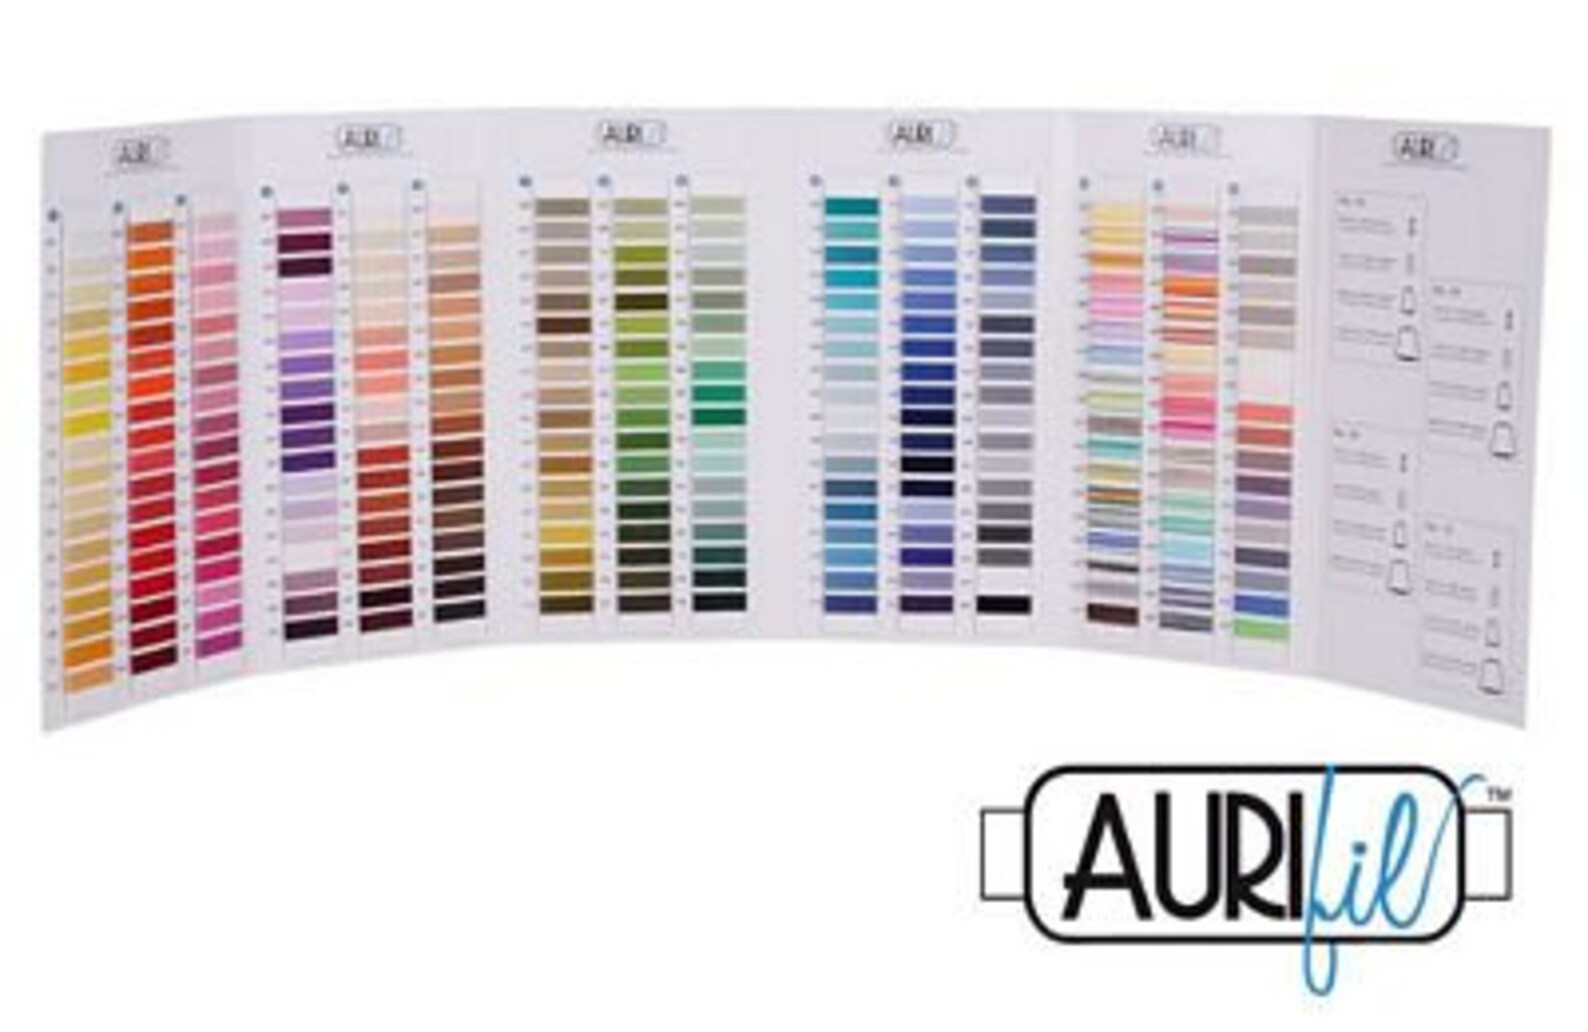 aurifil-thread-color-card-chart-real-thread-of-all-285-colors-etsy